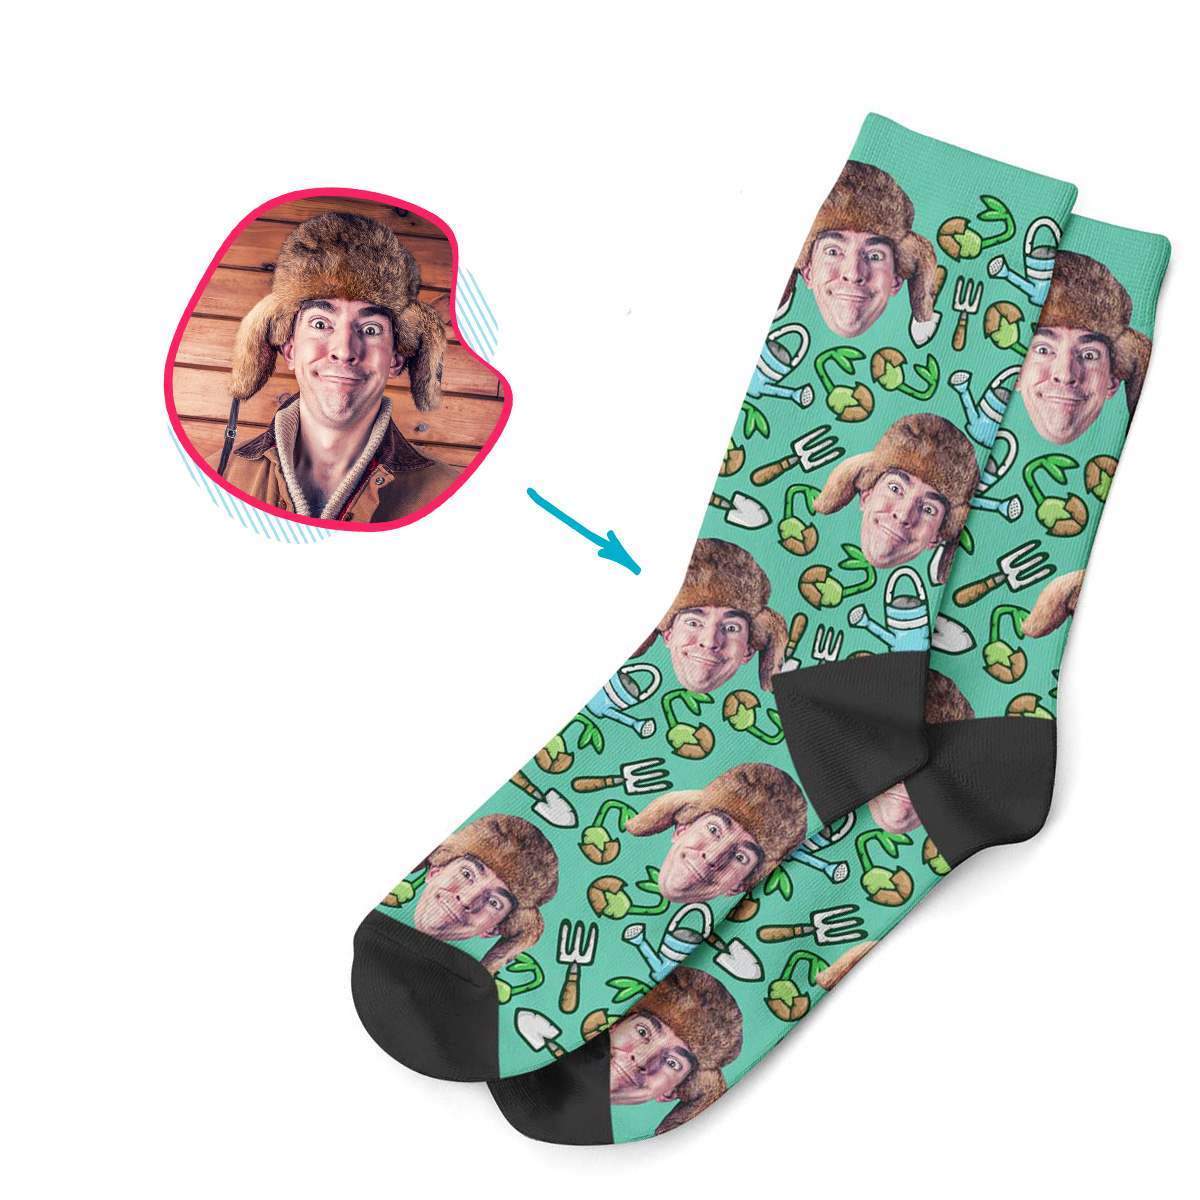 mint Gardening socks personalized with photo of face printed on them